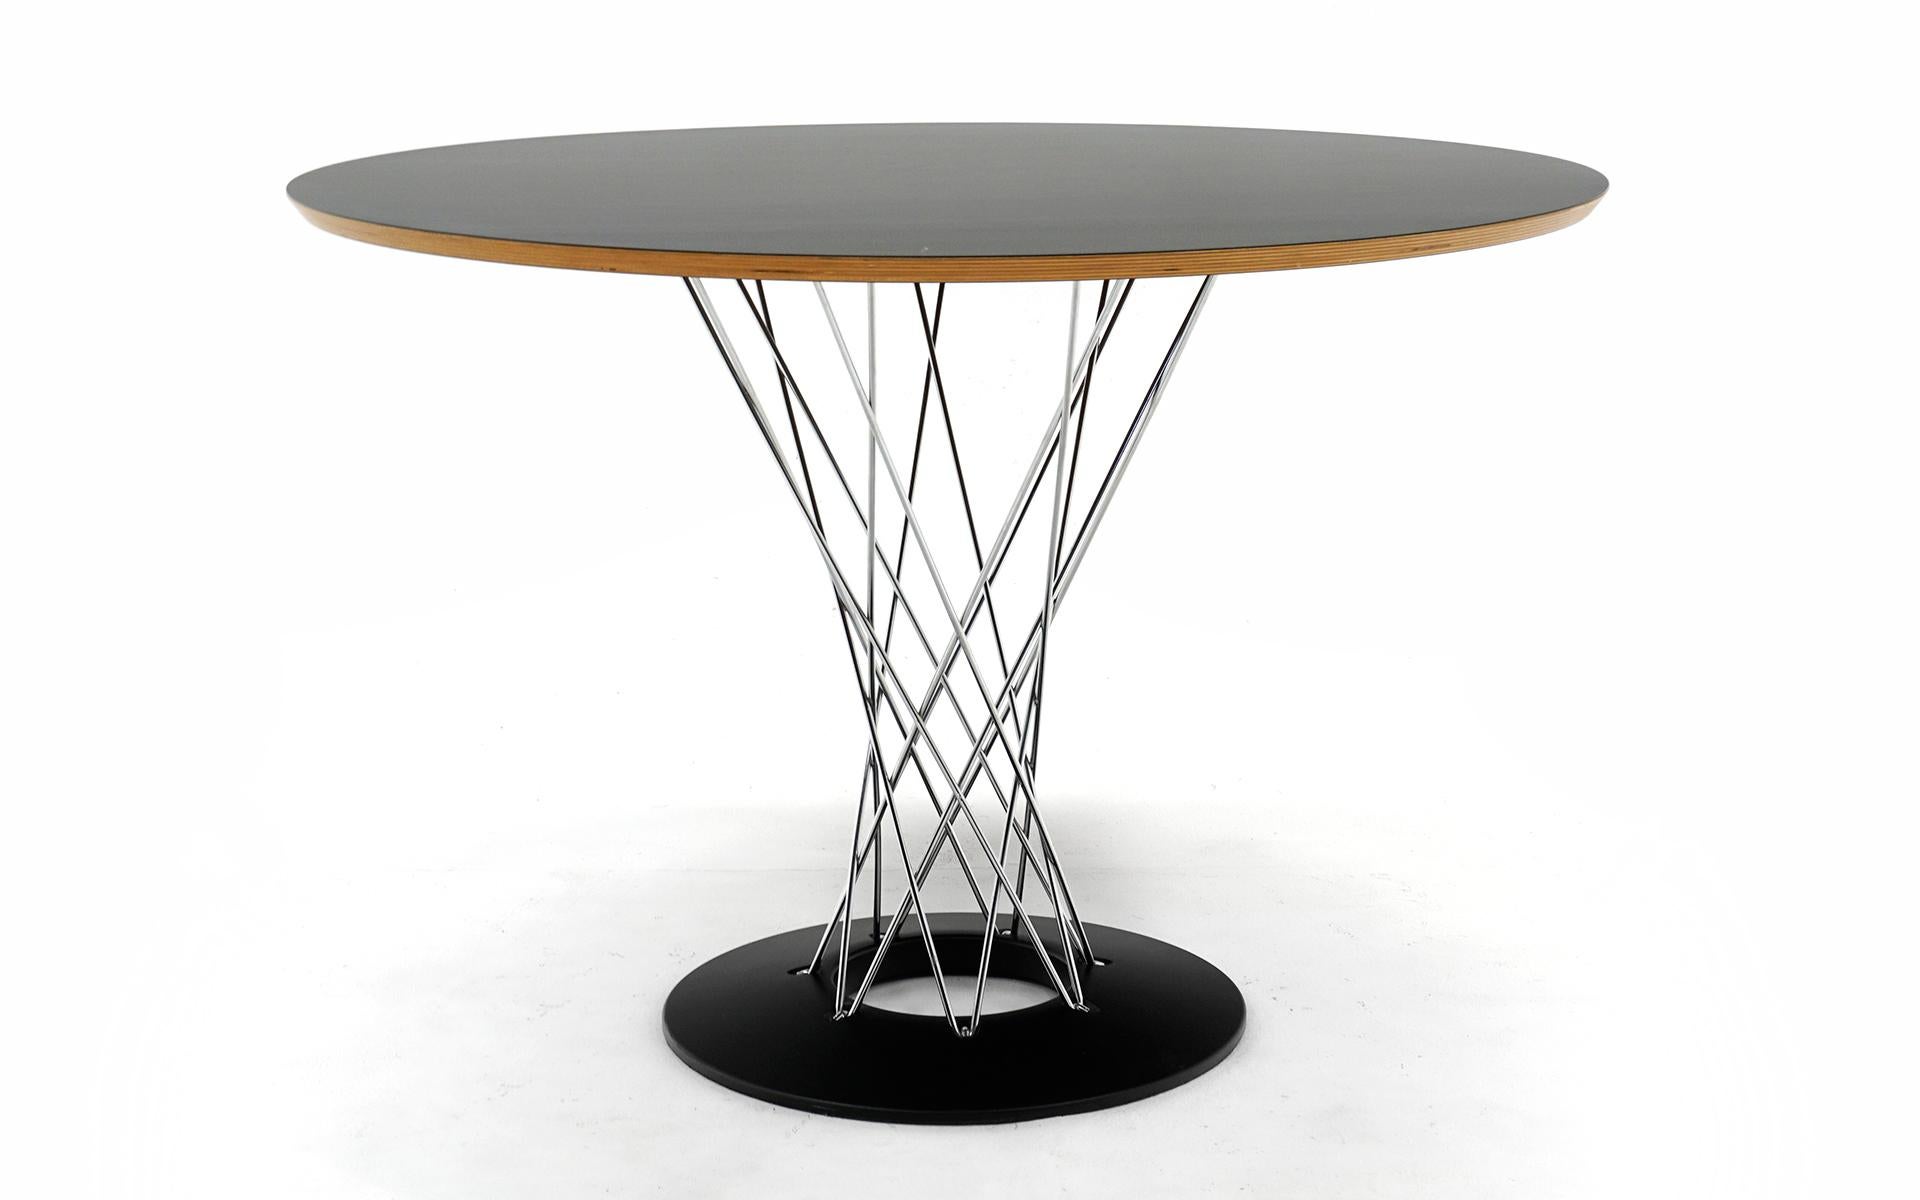 Forty two inch diameter Isamu Noguchi Cyclone dining table with black laminate top. Recent production and signed with the Knoll Studio medallion. Very good condition with no scratches to the table top. One very small nick on an edge. The chromed